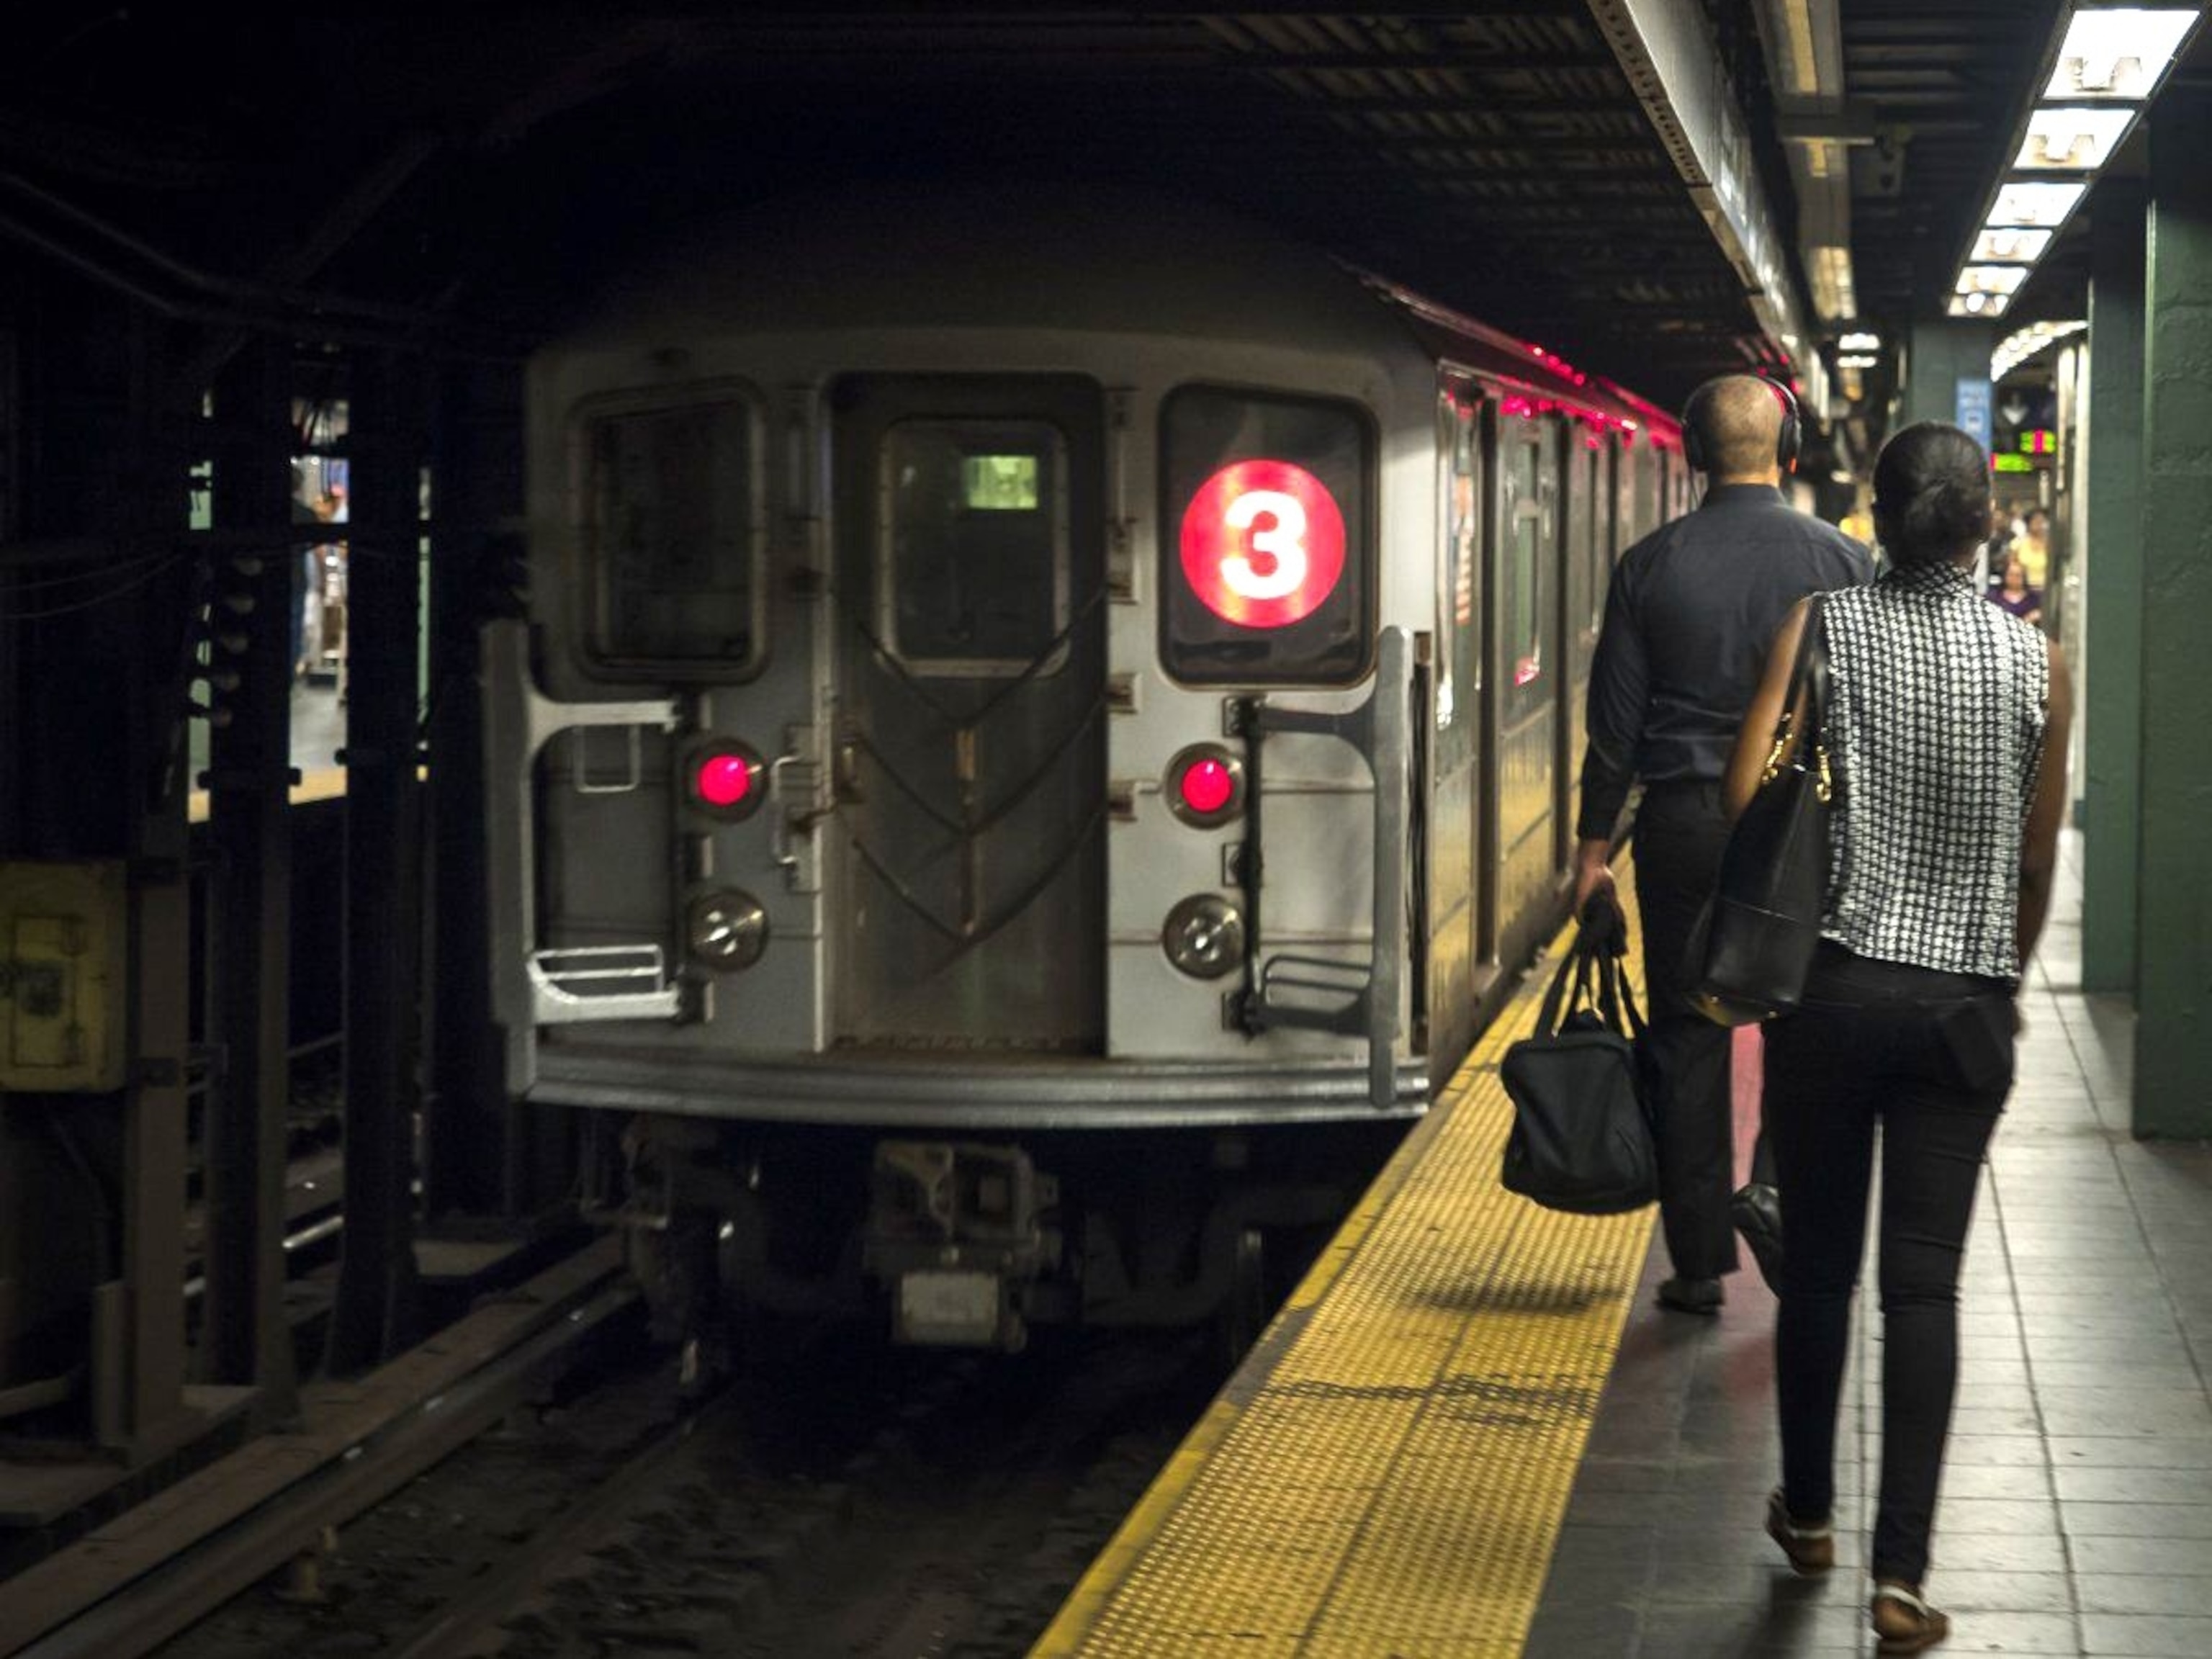 PHOTO: In this May 15, 2021, file photo, a 3 train pulls into a subway station in New York.